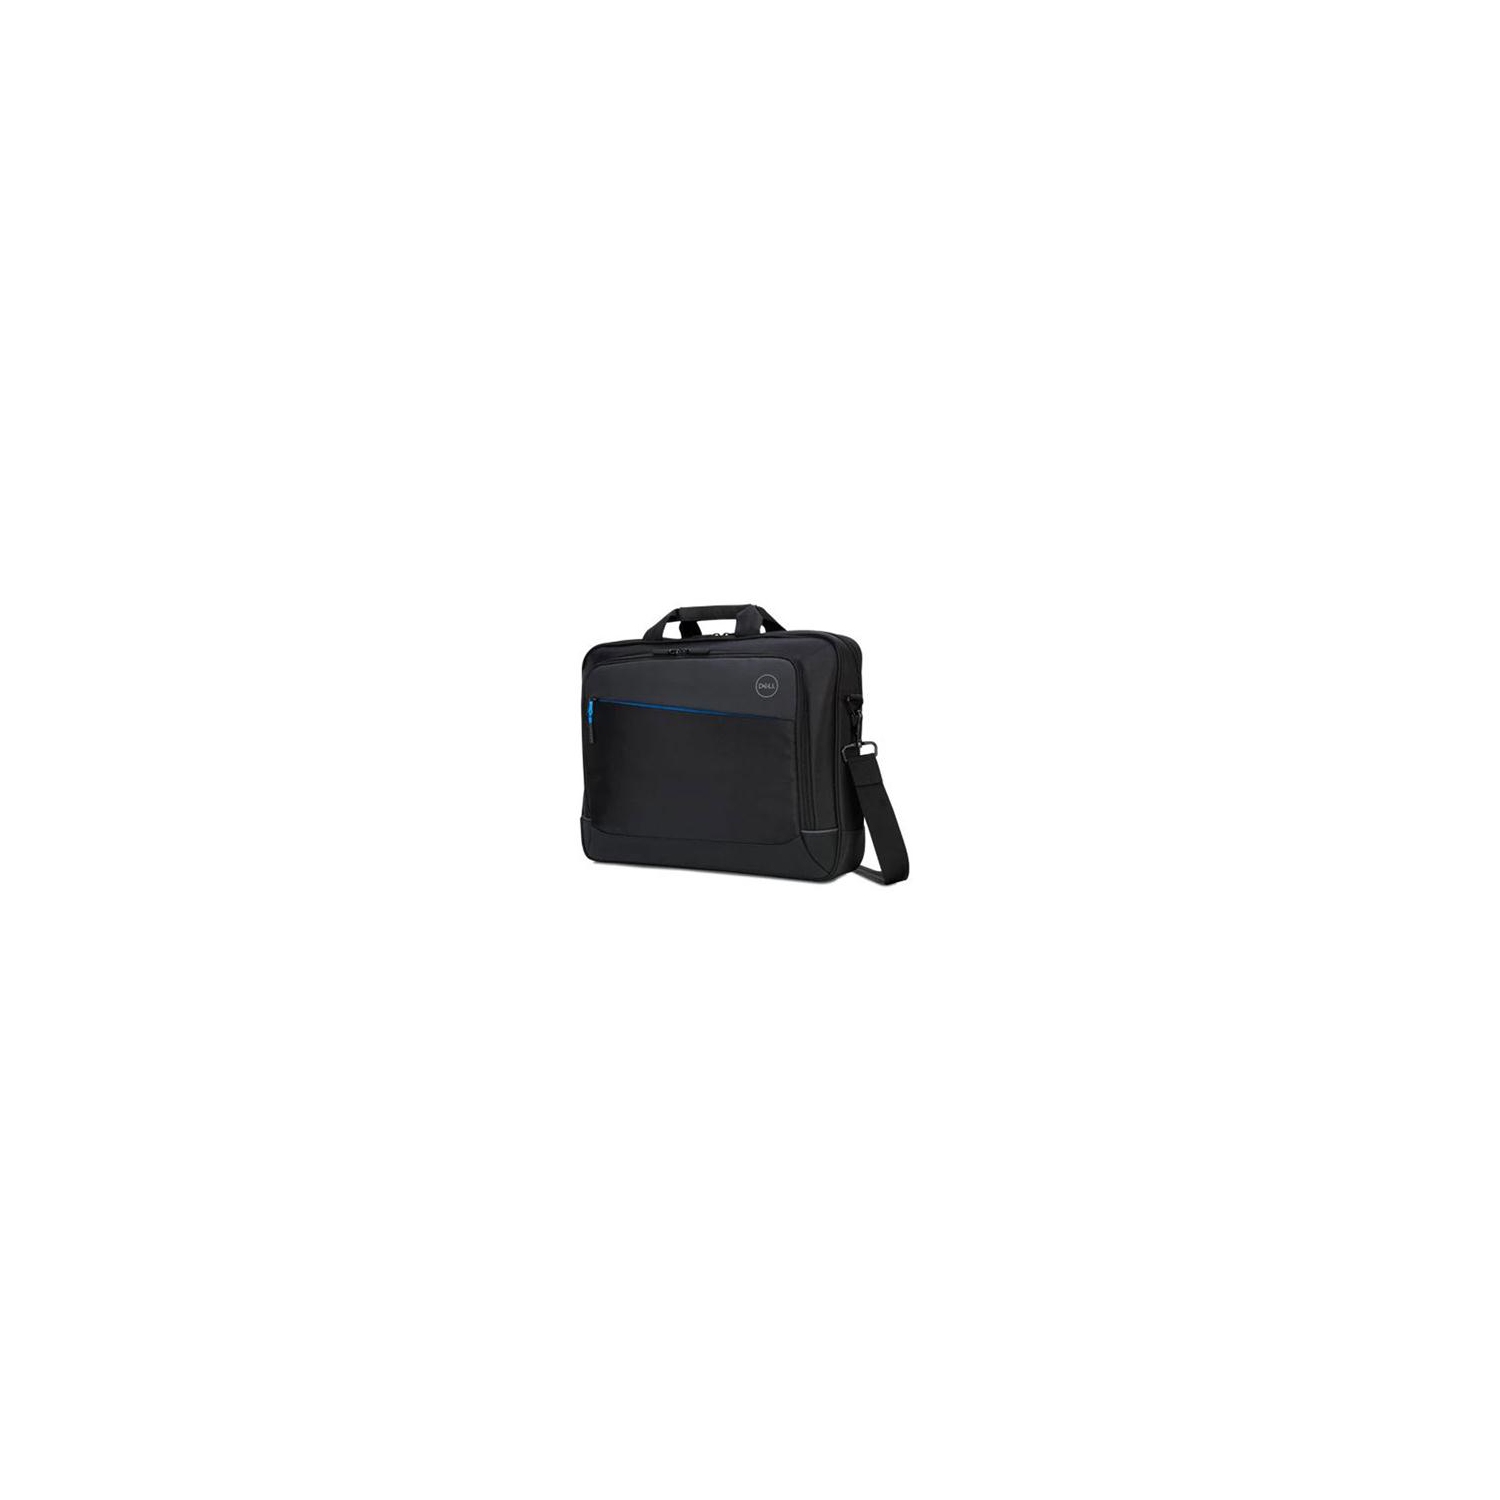 Dell PROFESSIONAL Carrying Case (Briefcase) for 14", Notebook, Tablet - Black